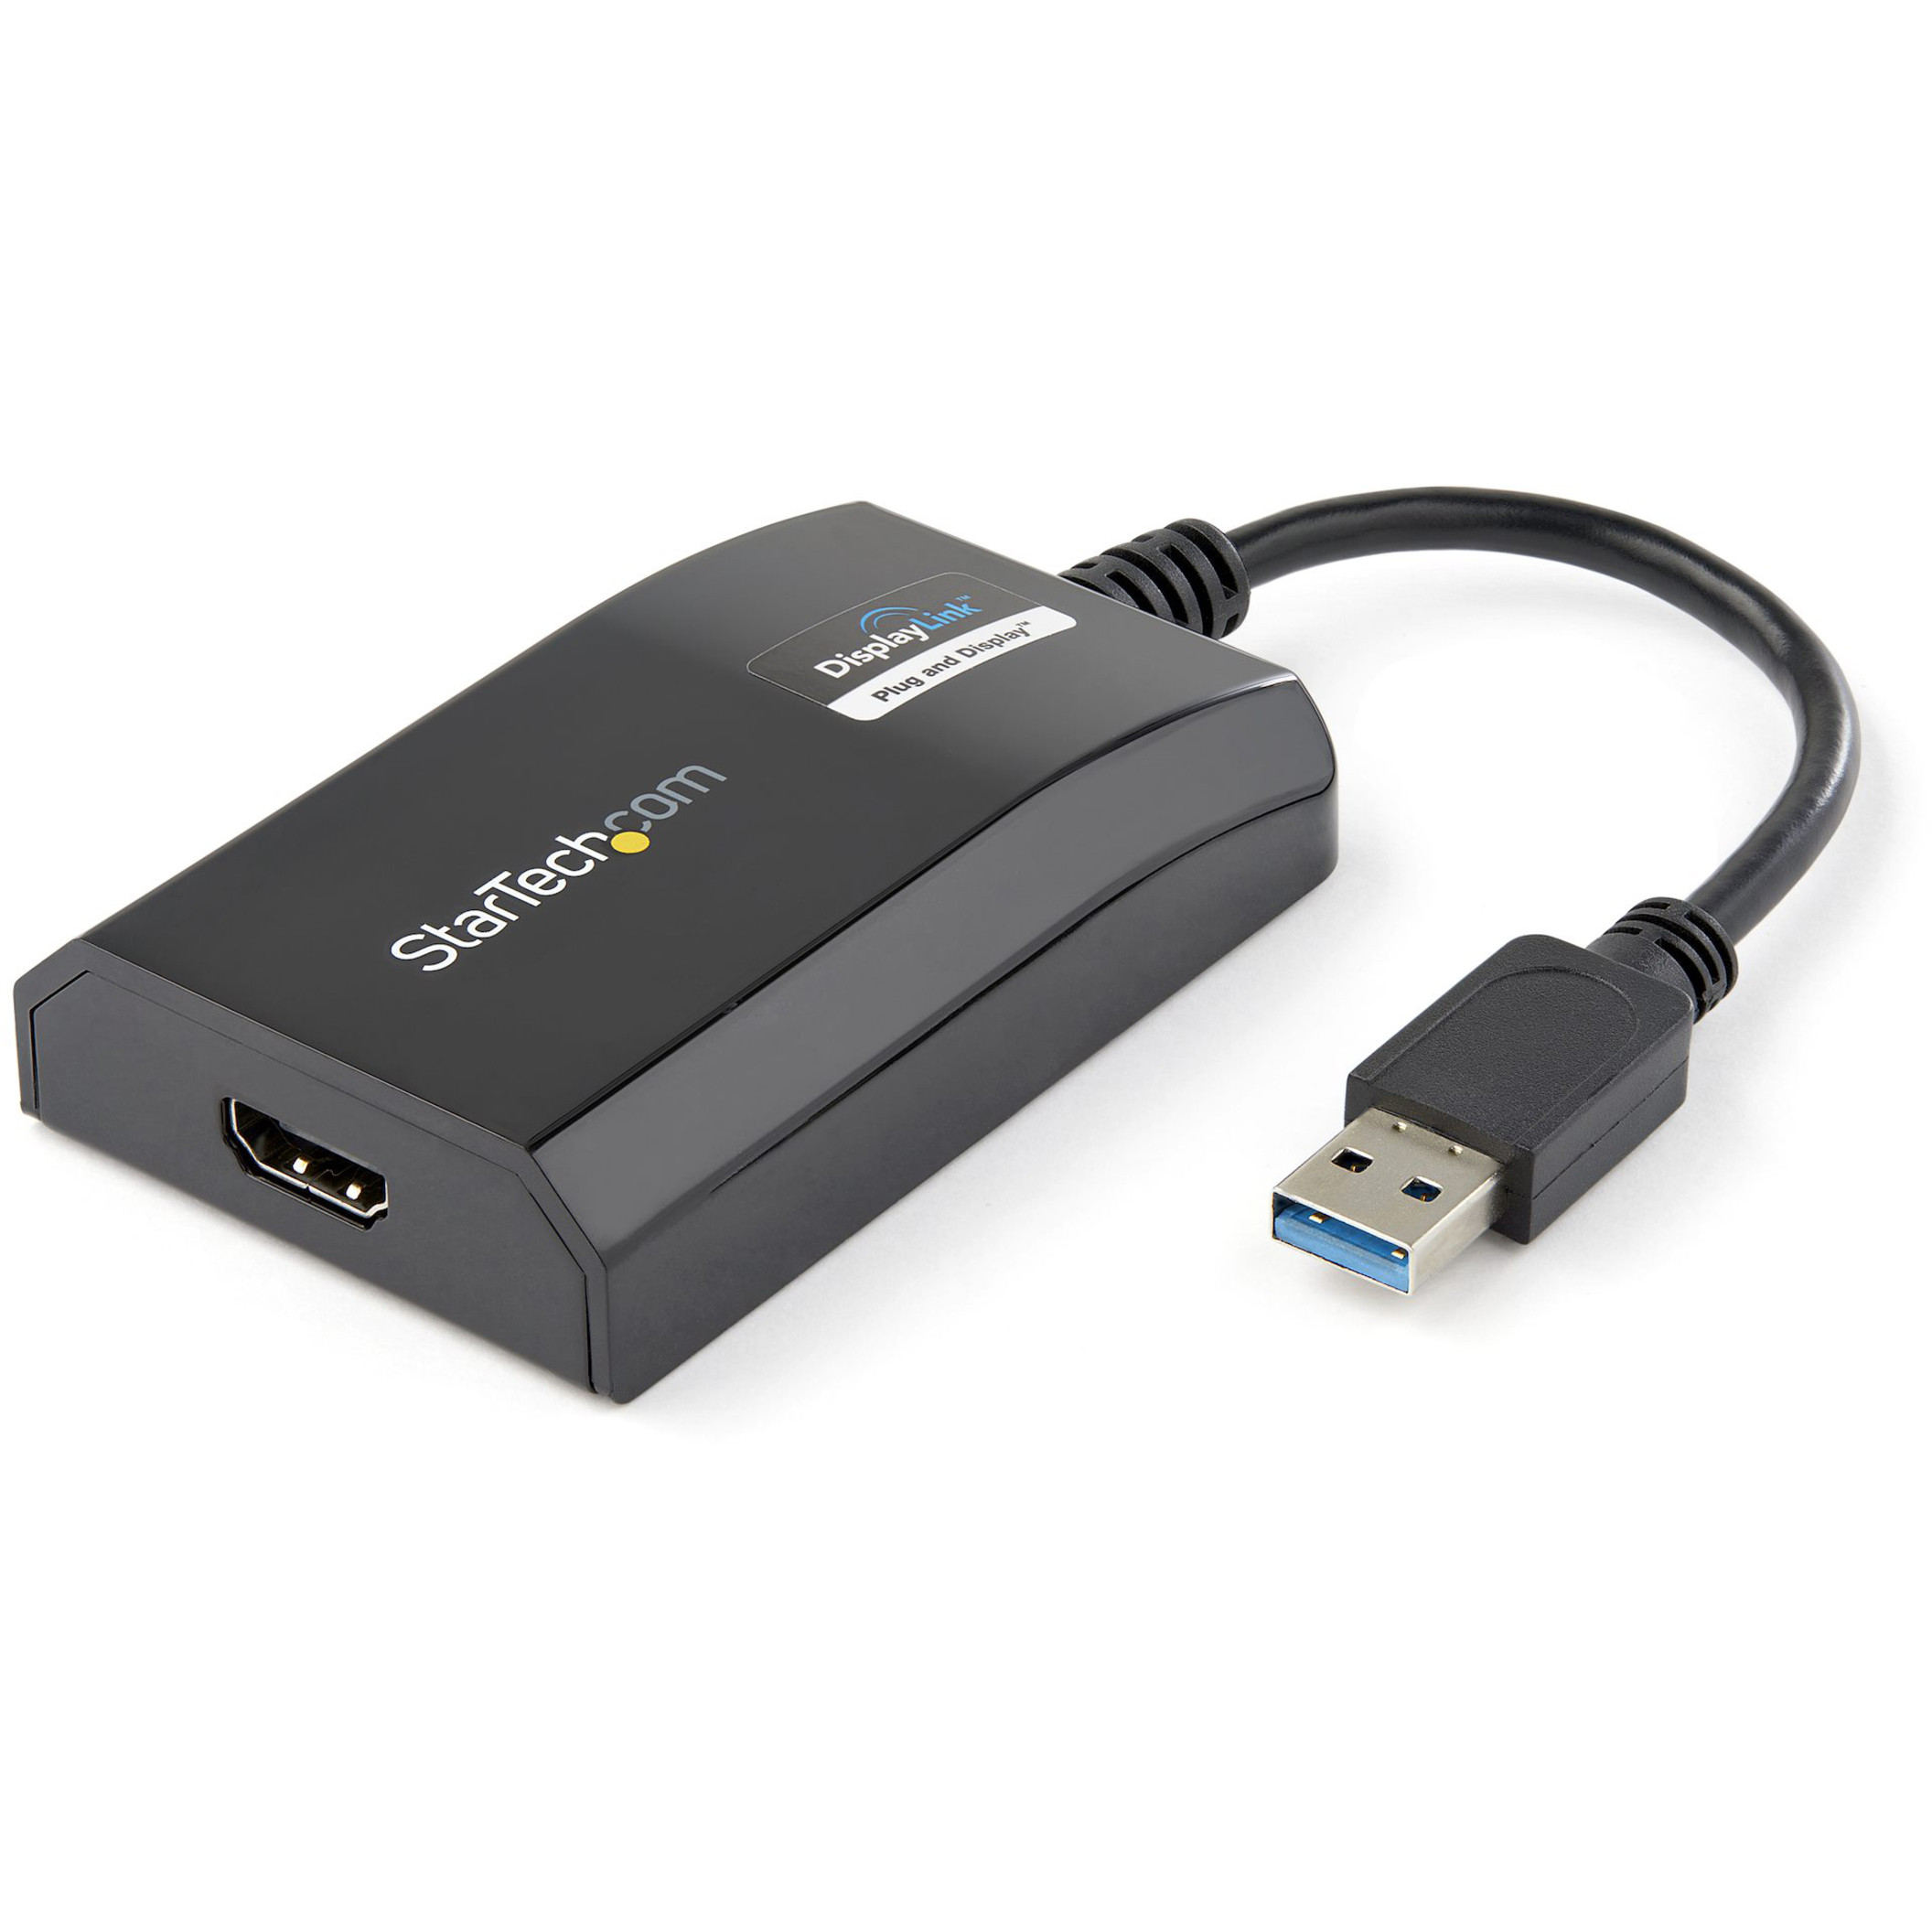 blok Bekendtgørelse Intakt Startech .com USB 3.0 to HDMI Adapter, DisplayLink Certified, 1920x1200, USB-A  to HDMI Display Adapter, External Graphics Card for Mac/PCUS... USB32HDPRO  - Corporate Armor